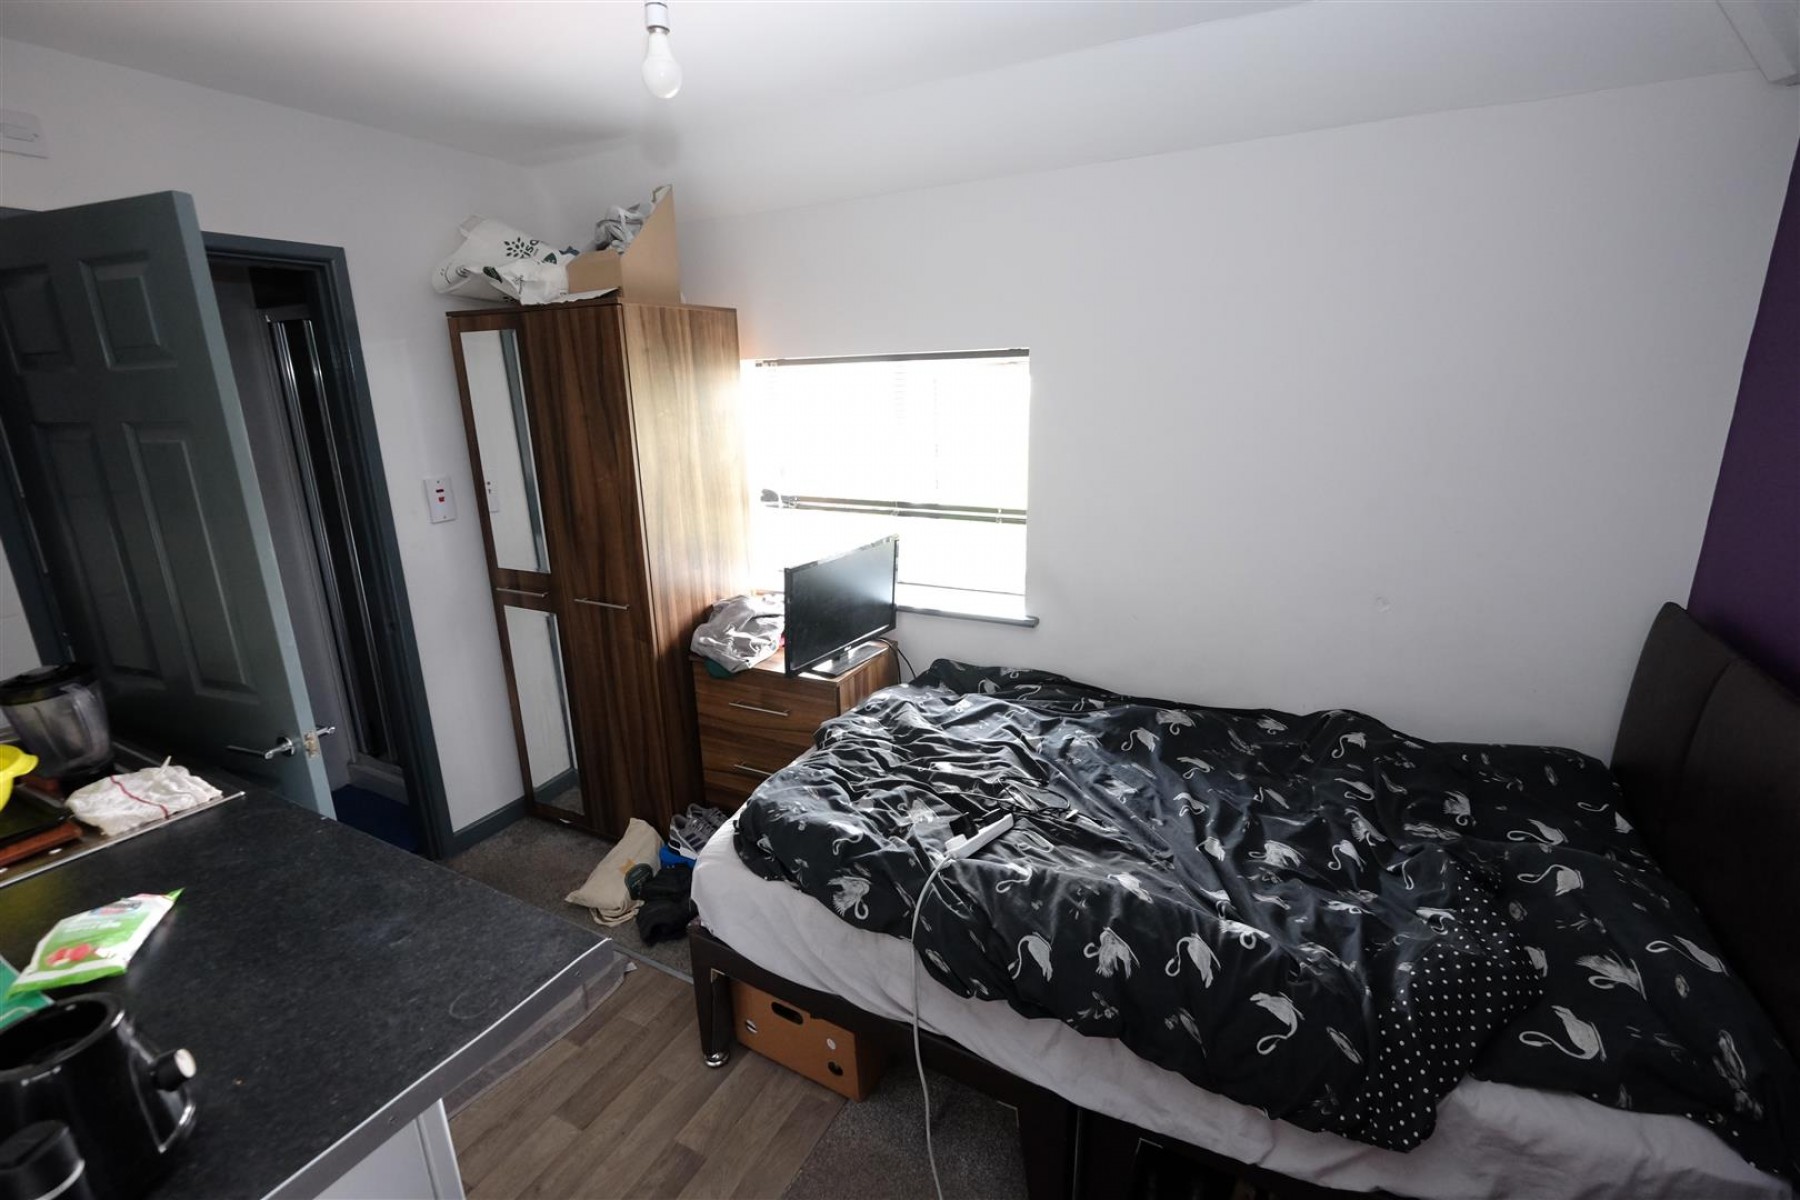 Images for 6 BED / 6 BATH HMO - £42K PA